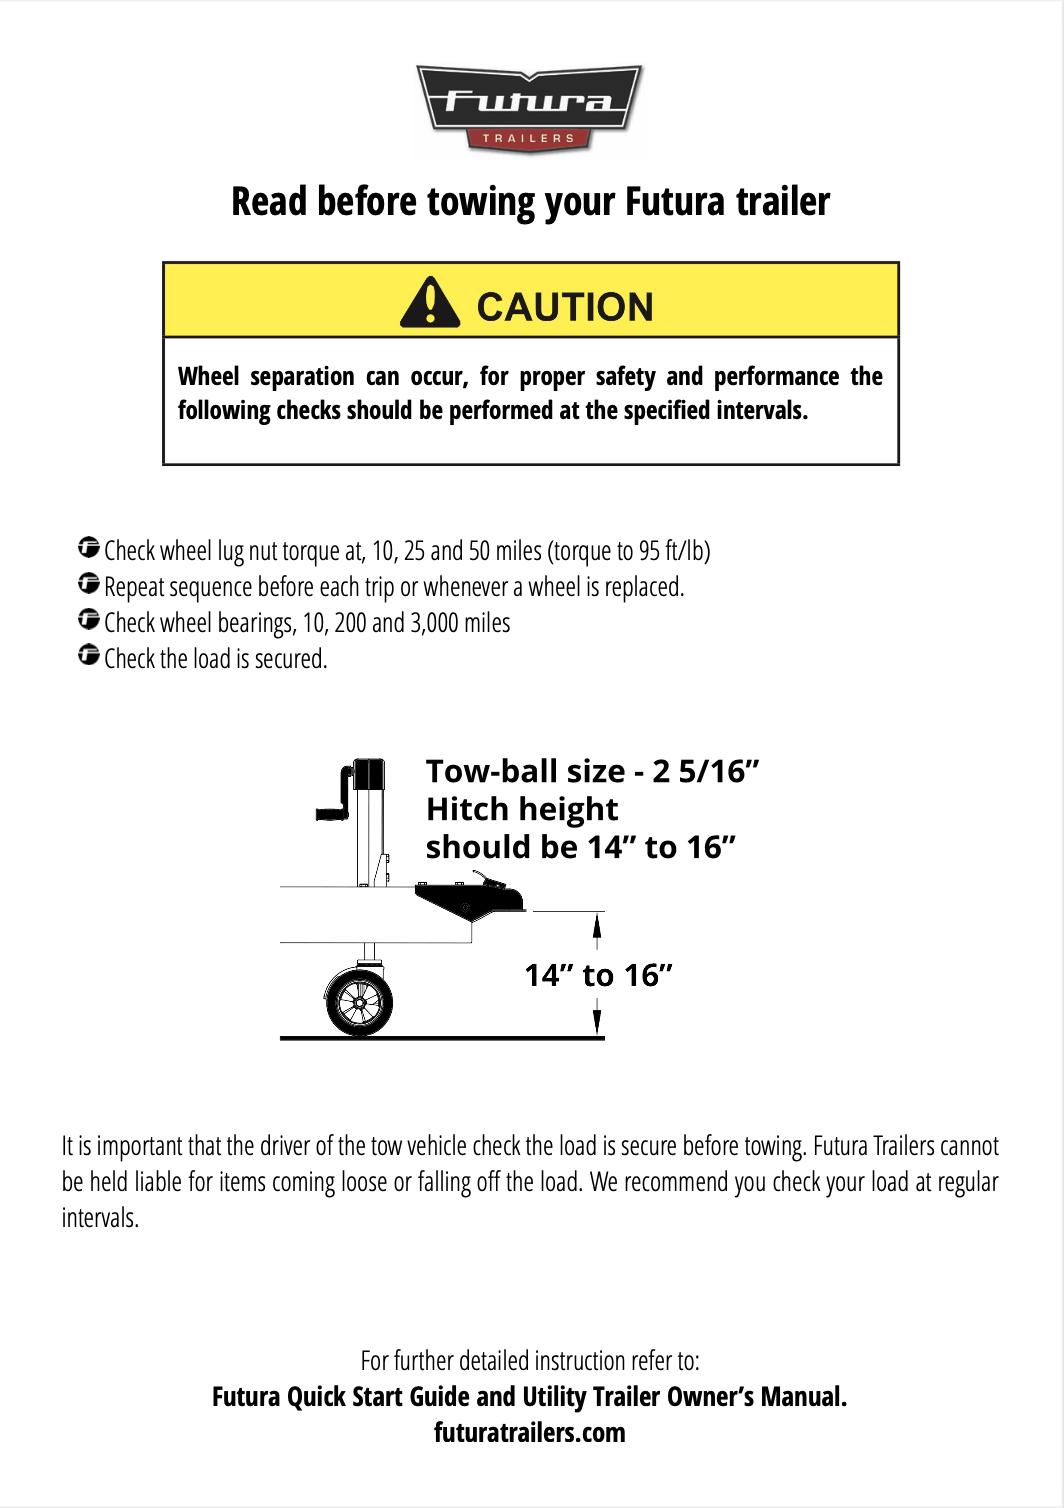 User Guide - Read Before Towing - US